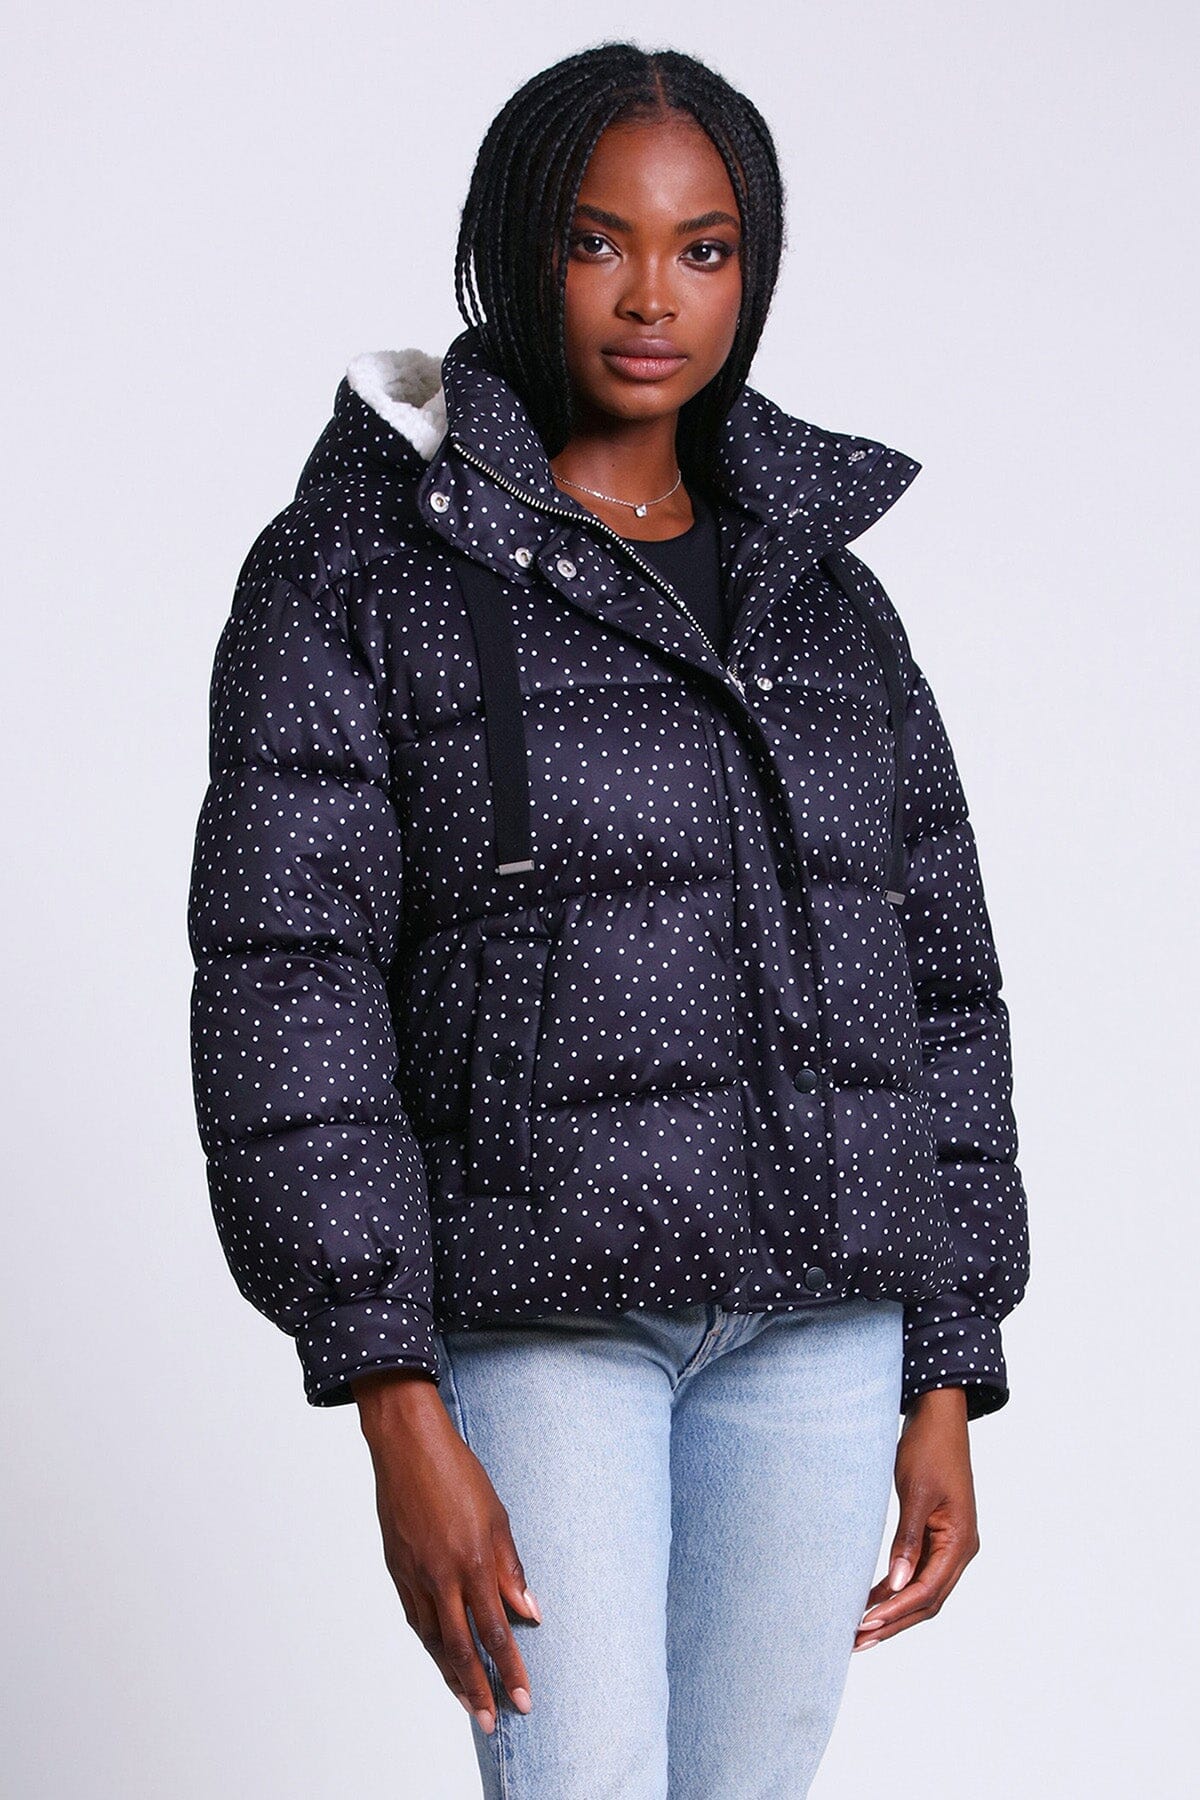 printed thermal puff hooded puffer jacket coat black and white polka dots - women's figure flattering warm fall outerwear